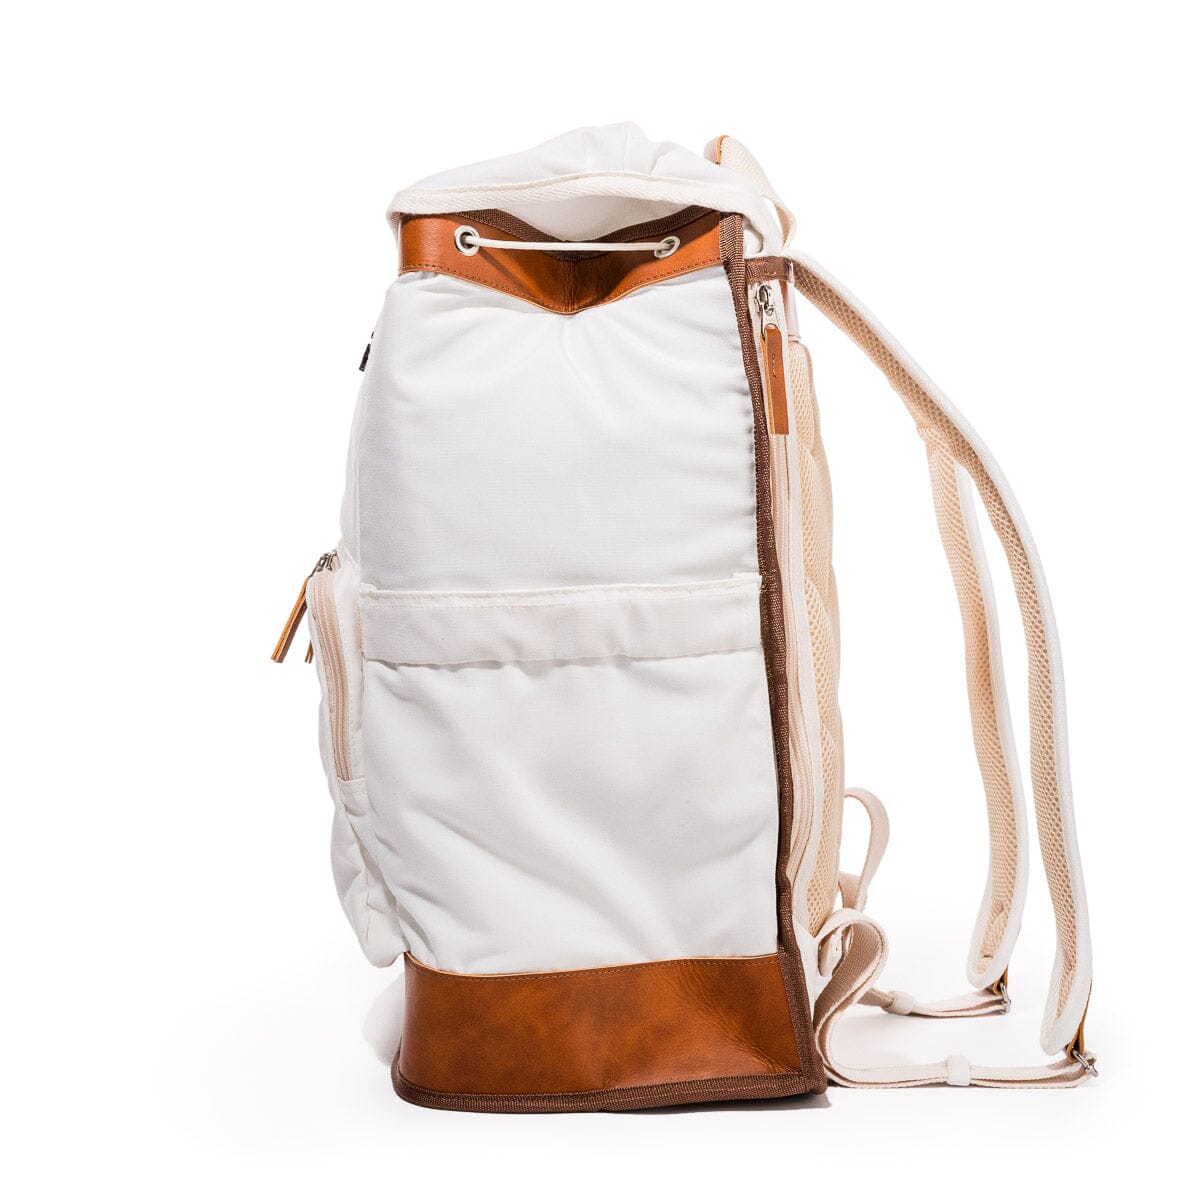 The Backpack Cooler - Rivie White Backpack Cooler Business & Pleasure Co 